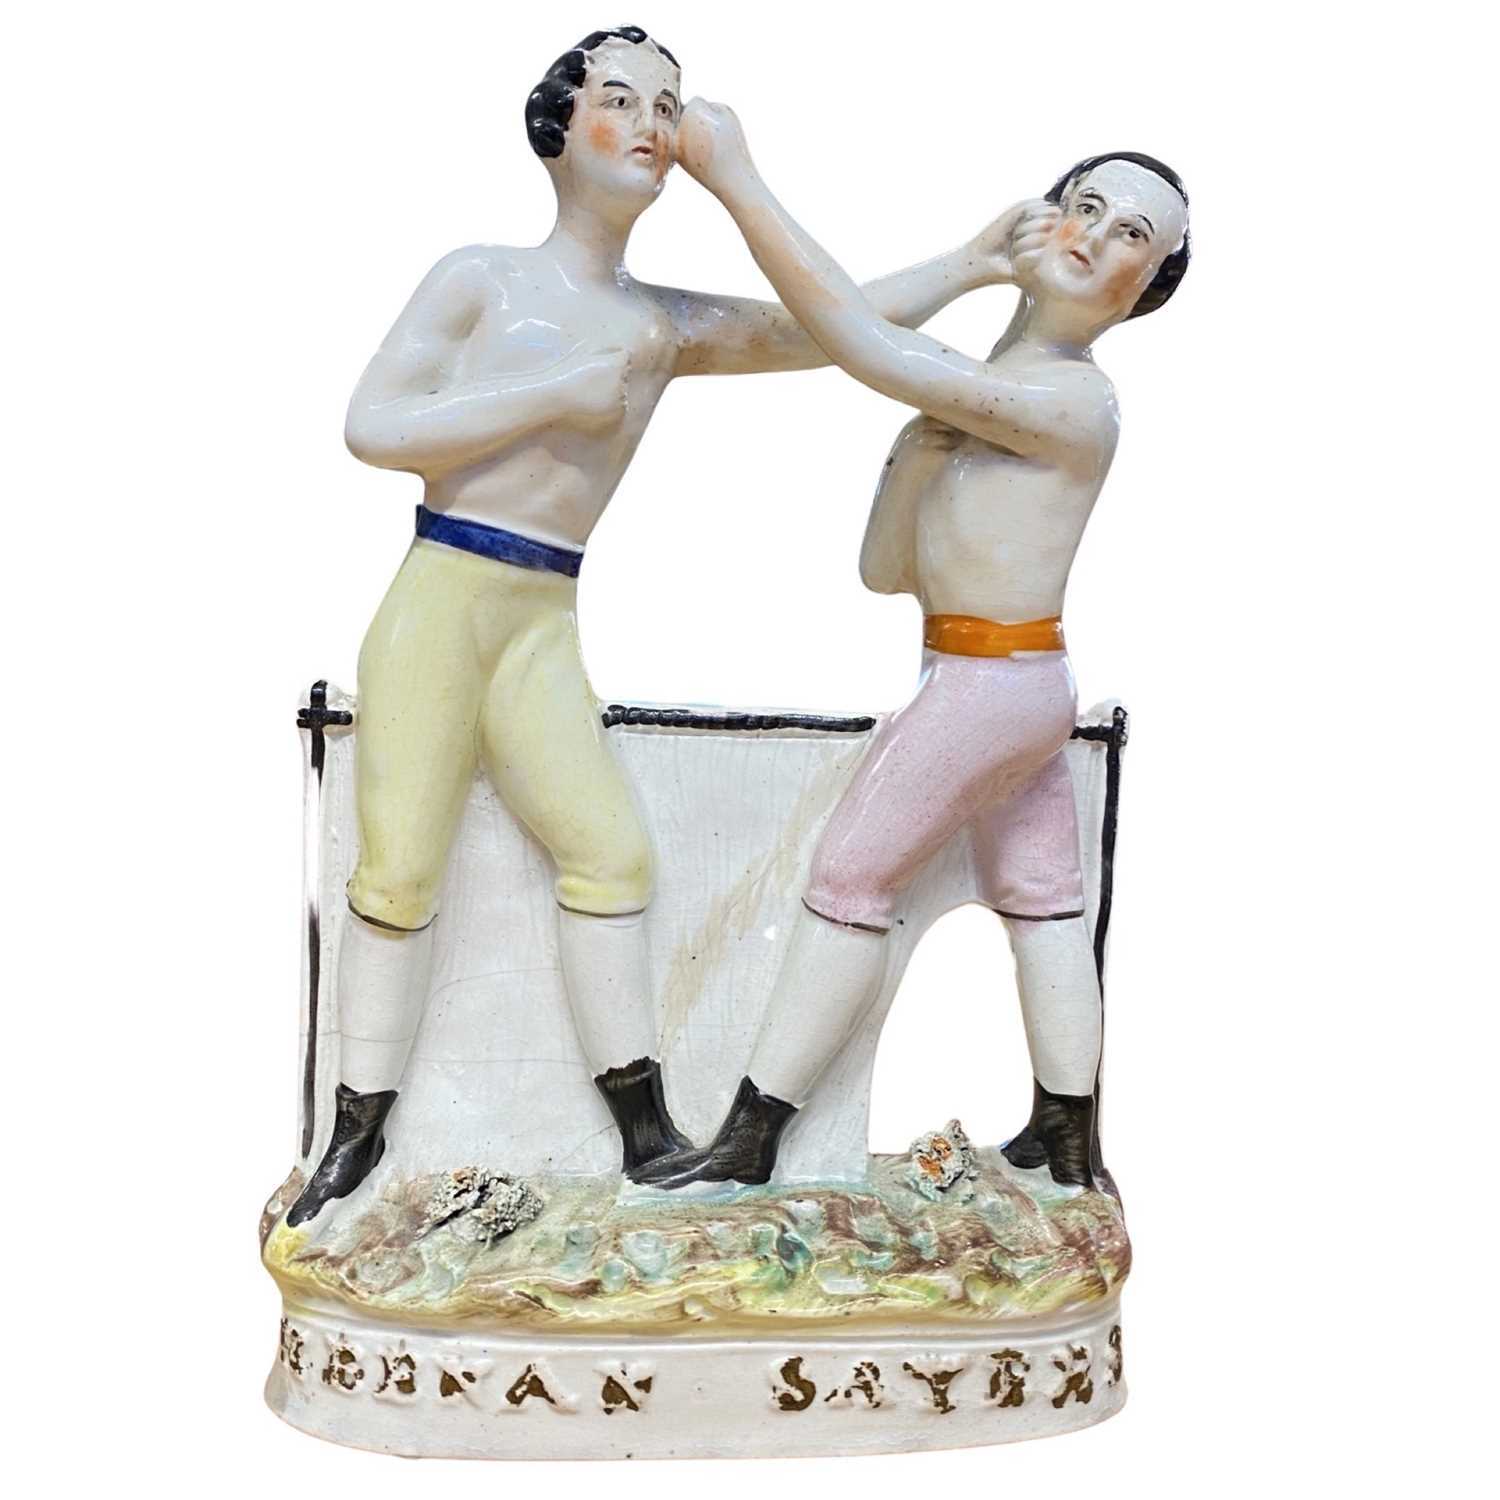 A Staffordshire figure of Heenan and Sayers, boxing group, mid/late 19th Century. The boxing match